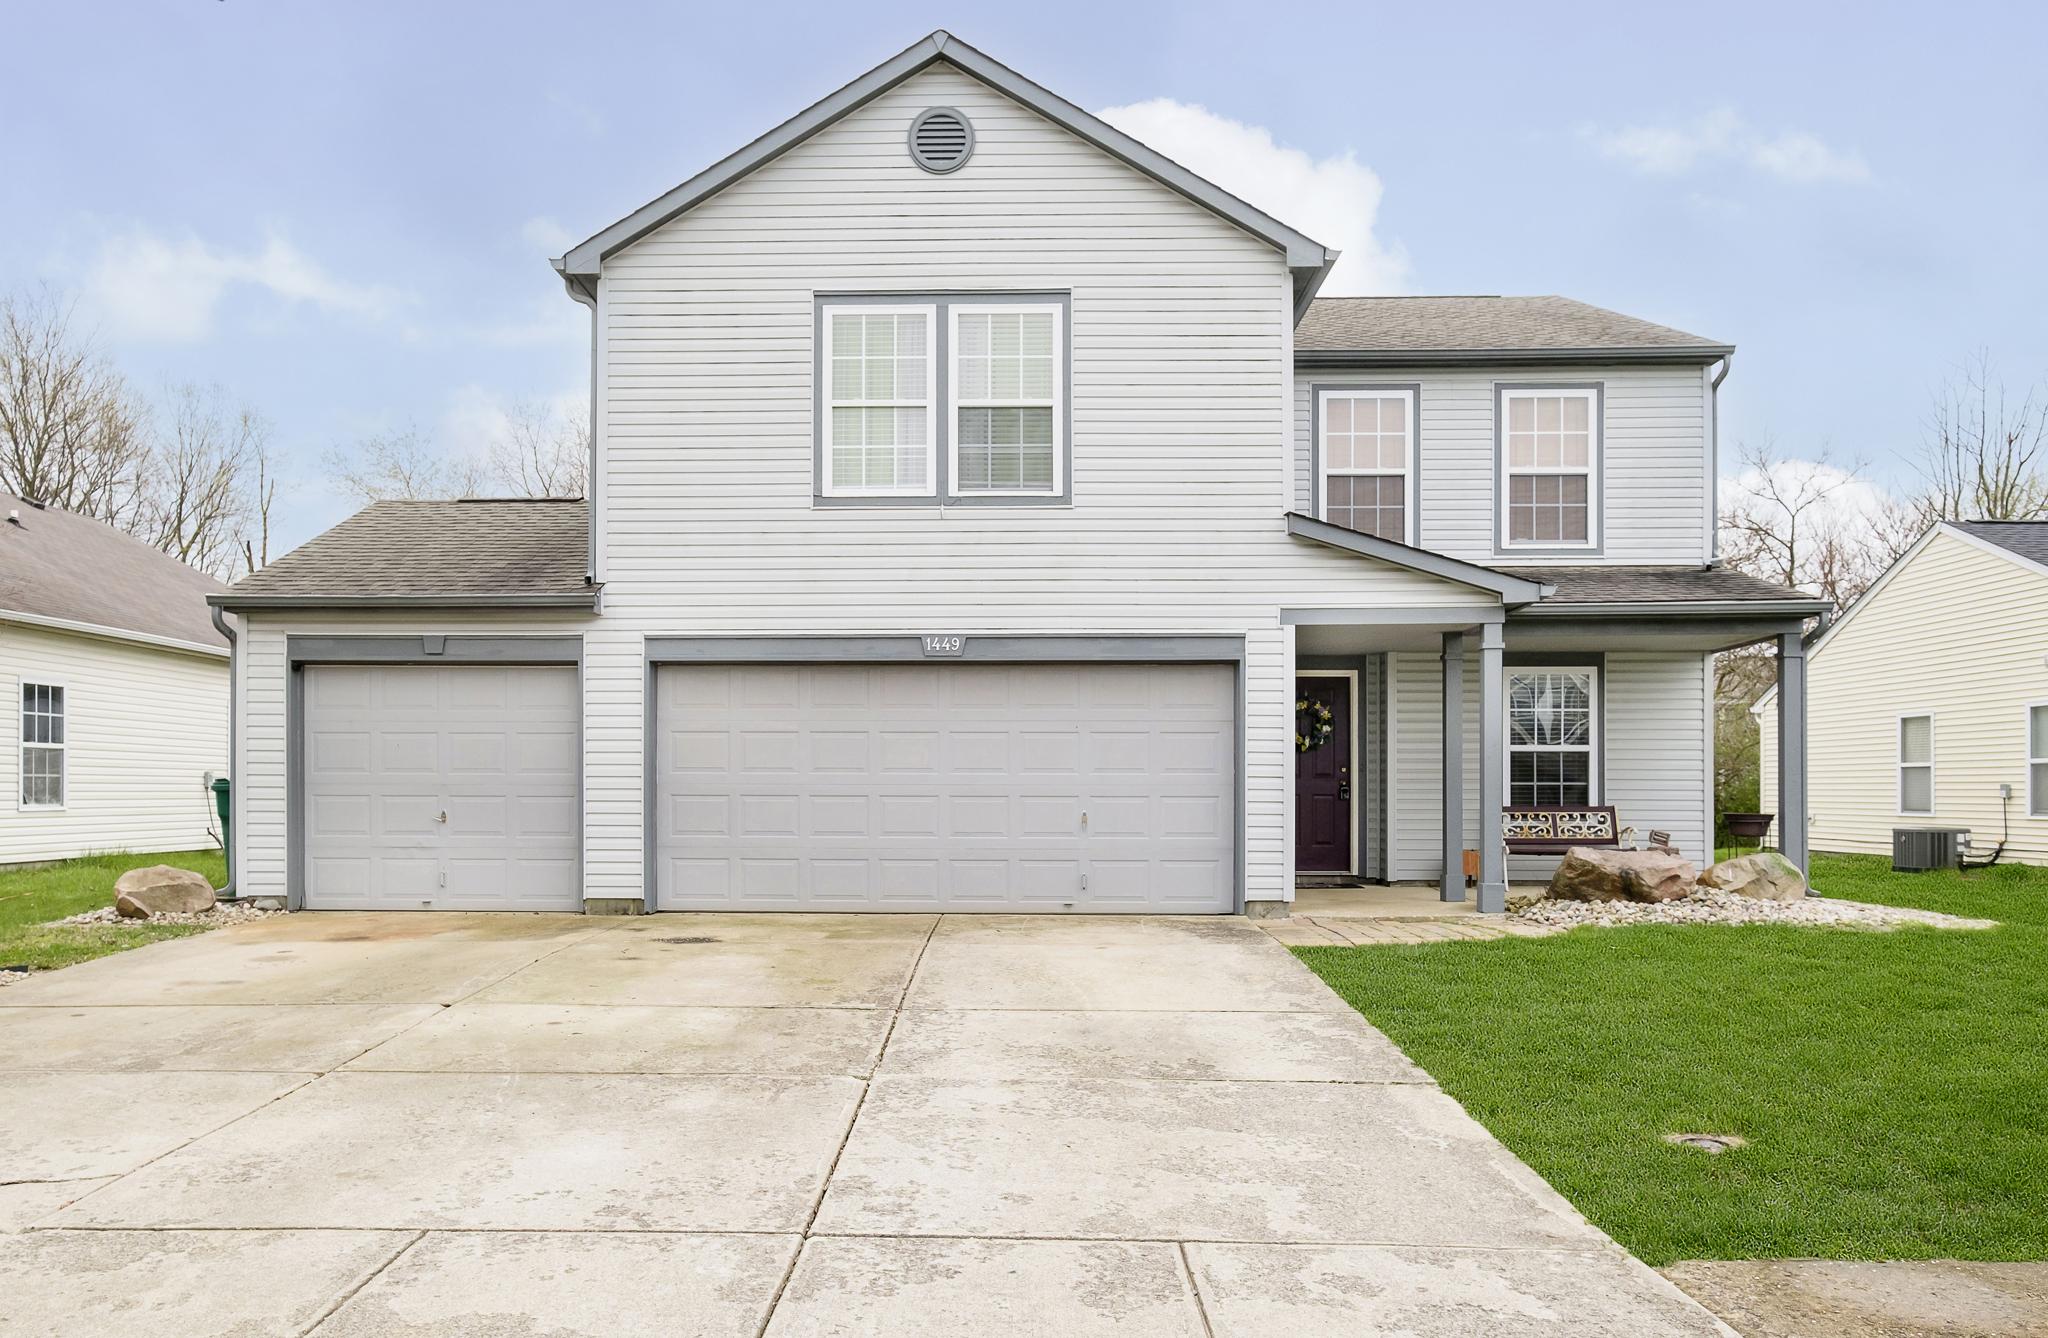 Photo one of 1449 Eucalyptus Cir Greenfield IN 46140 | MLS 21972324